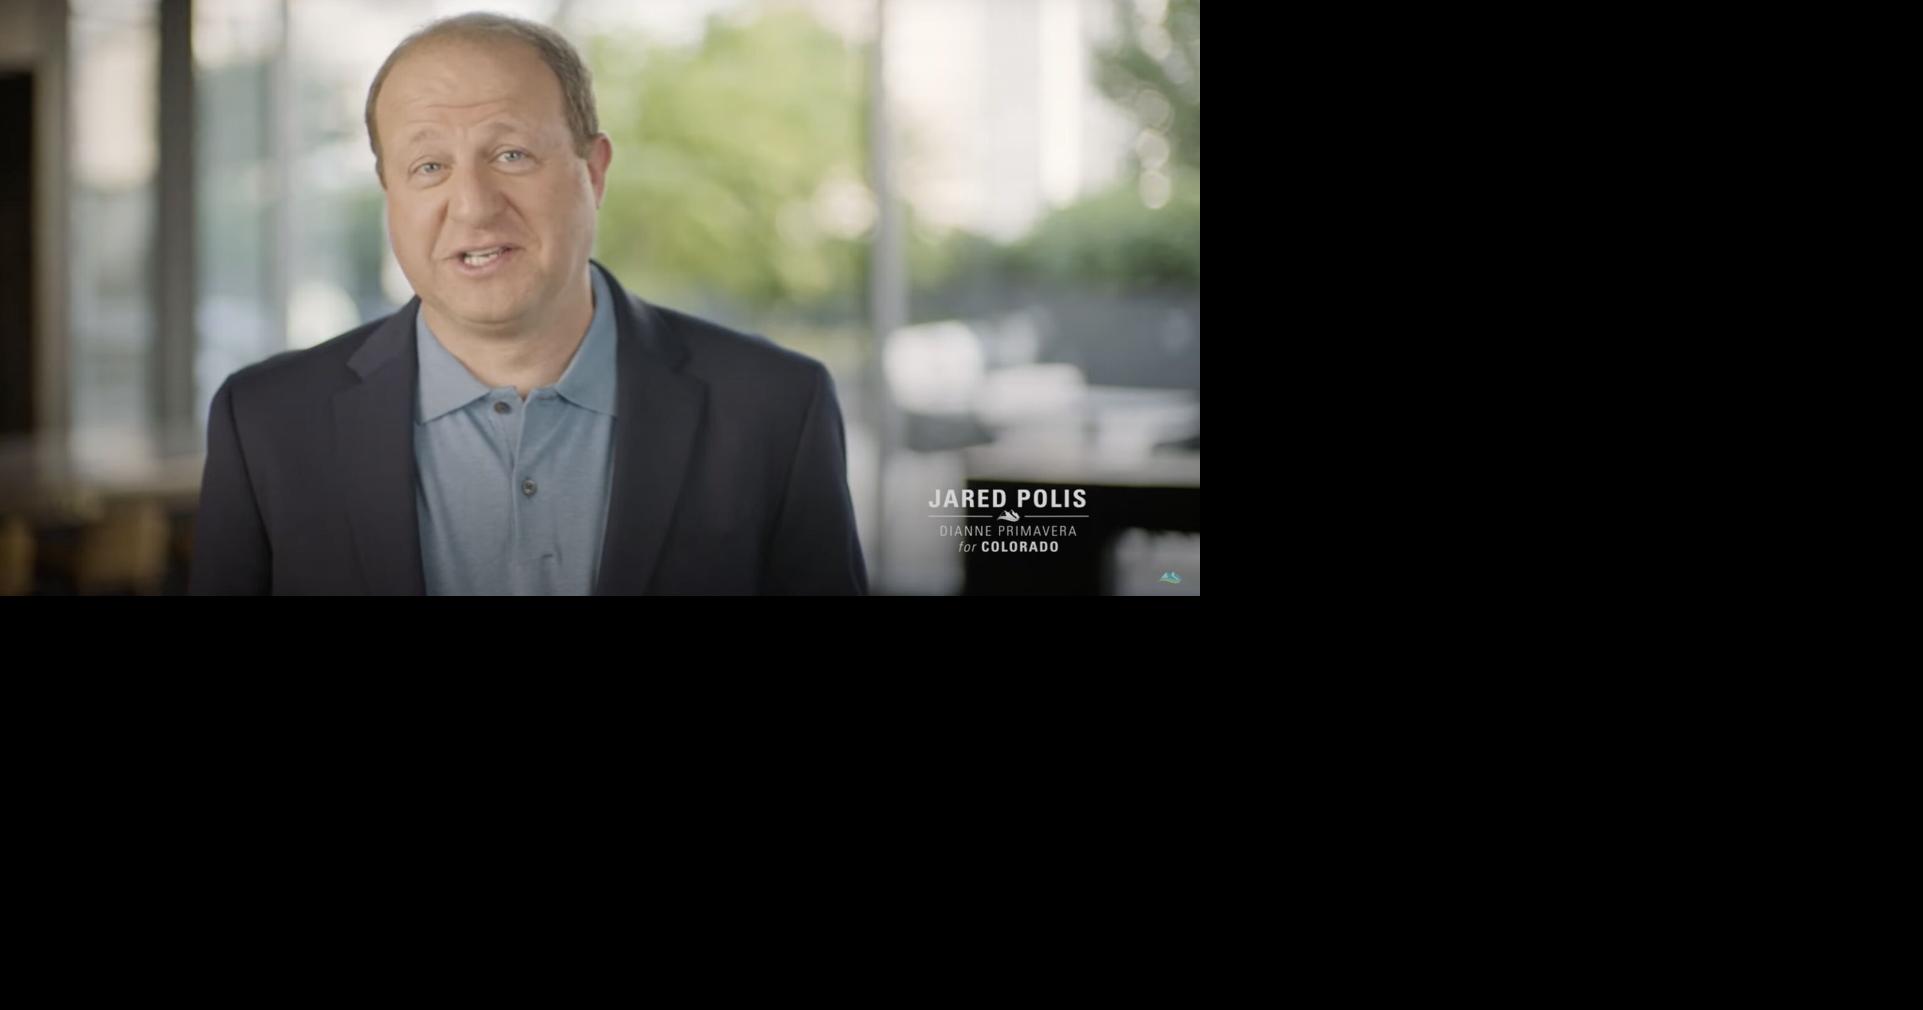 WATCH: Colorado Gov. Jared Polis launches 1st TV ad in Democrat’s reelection campaign